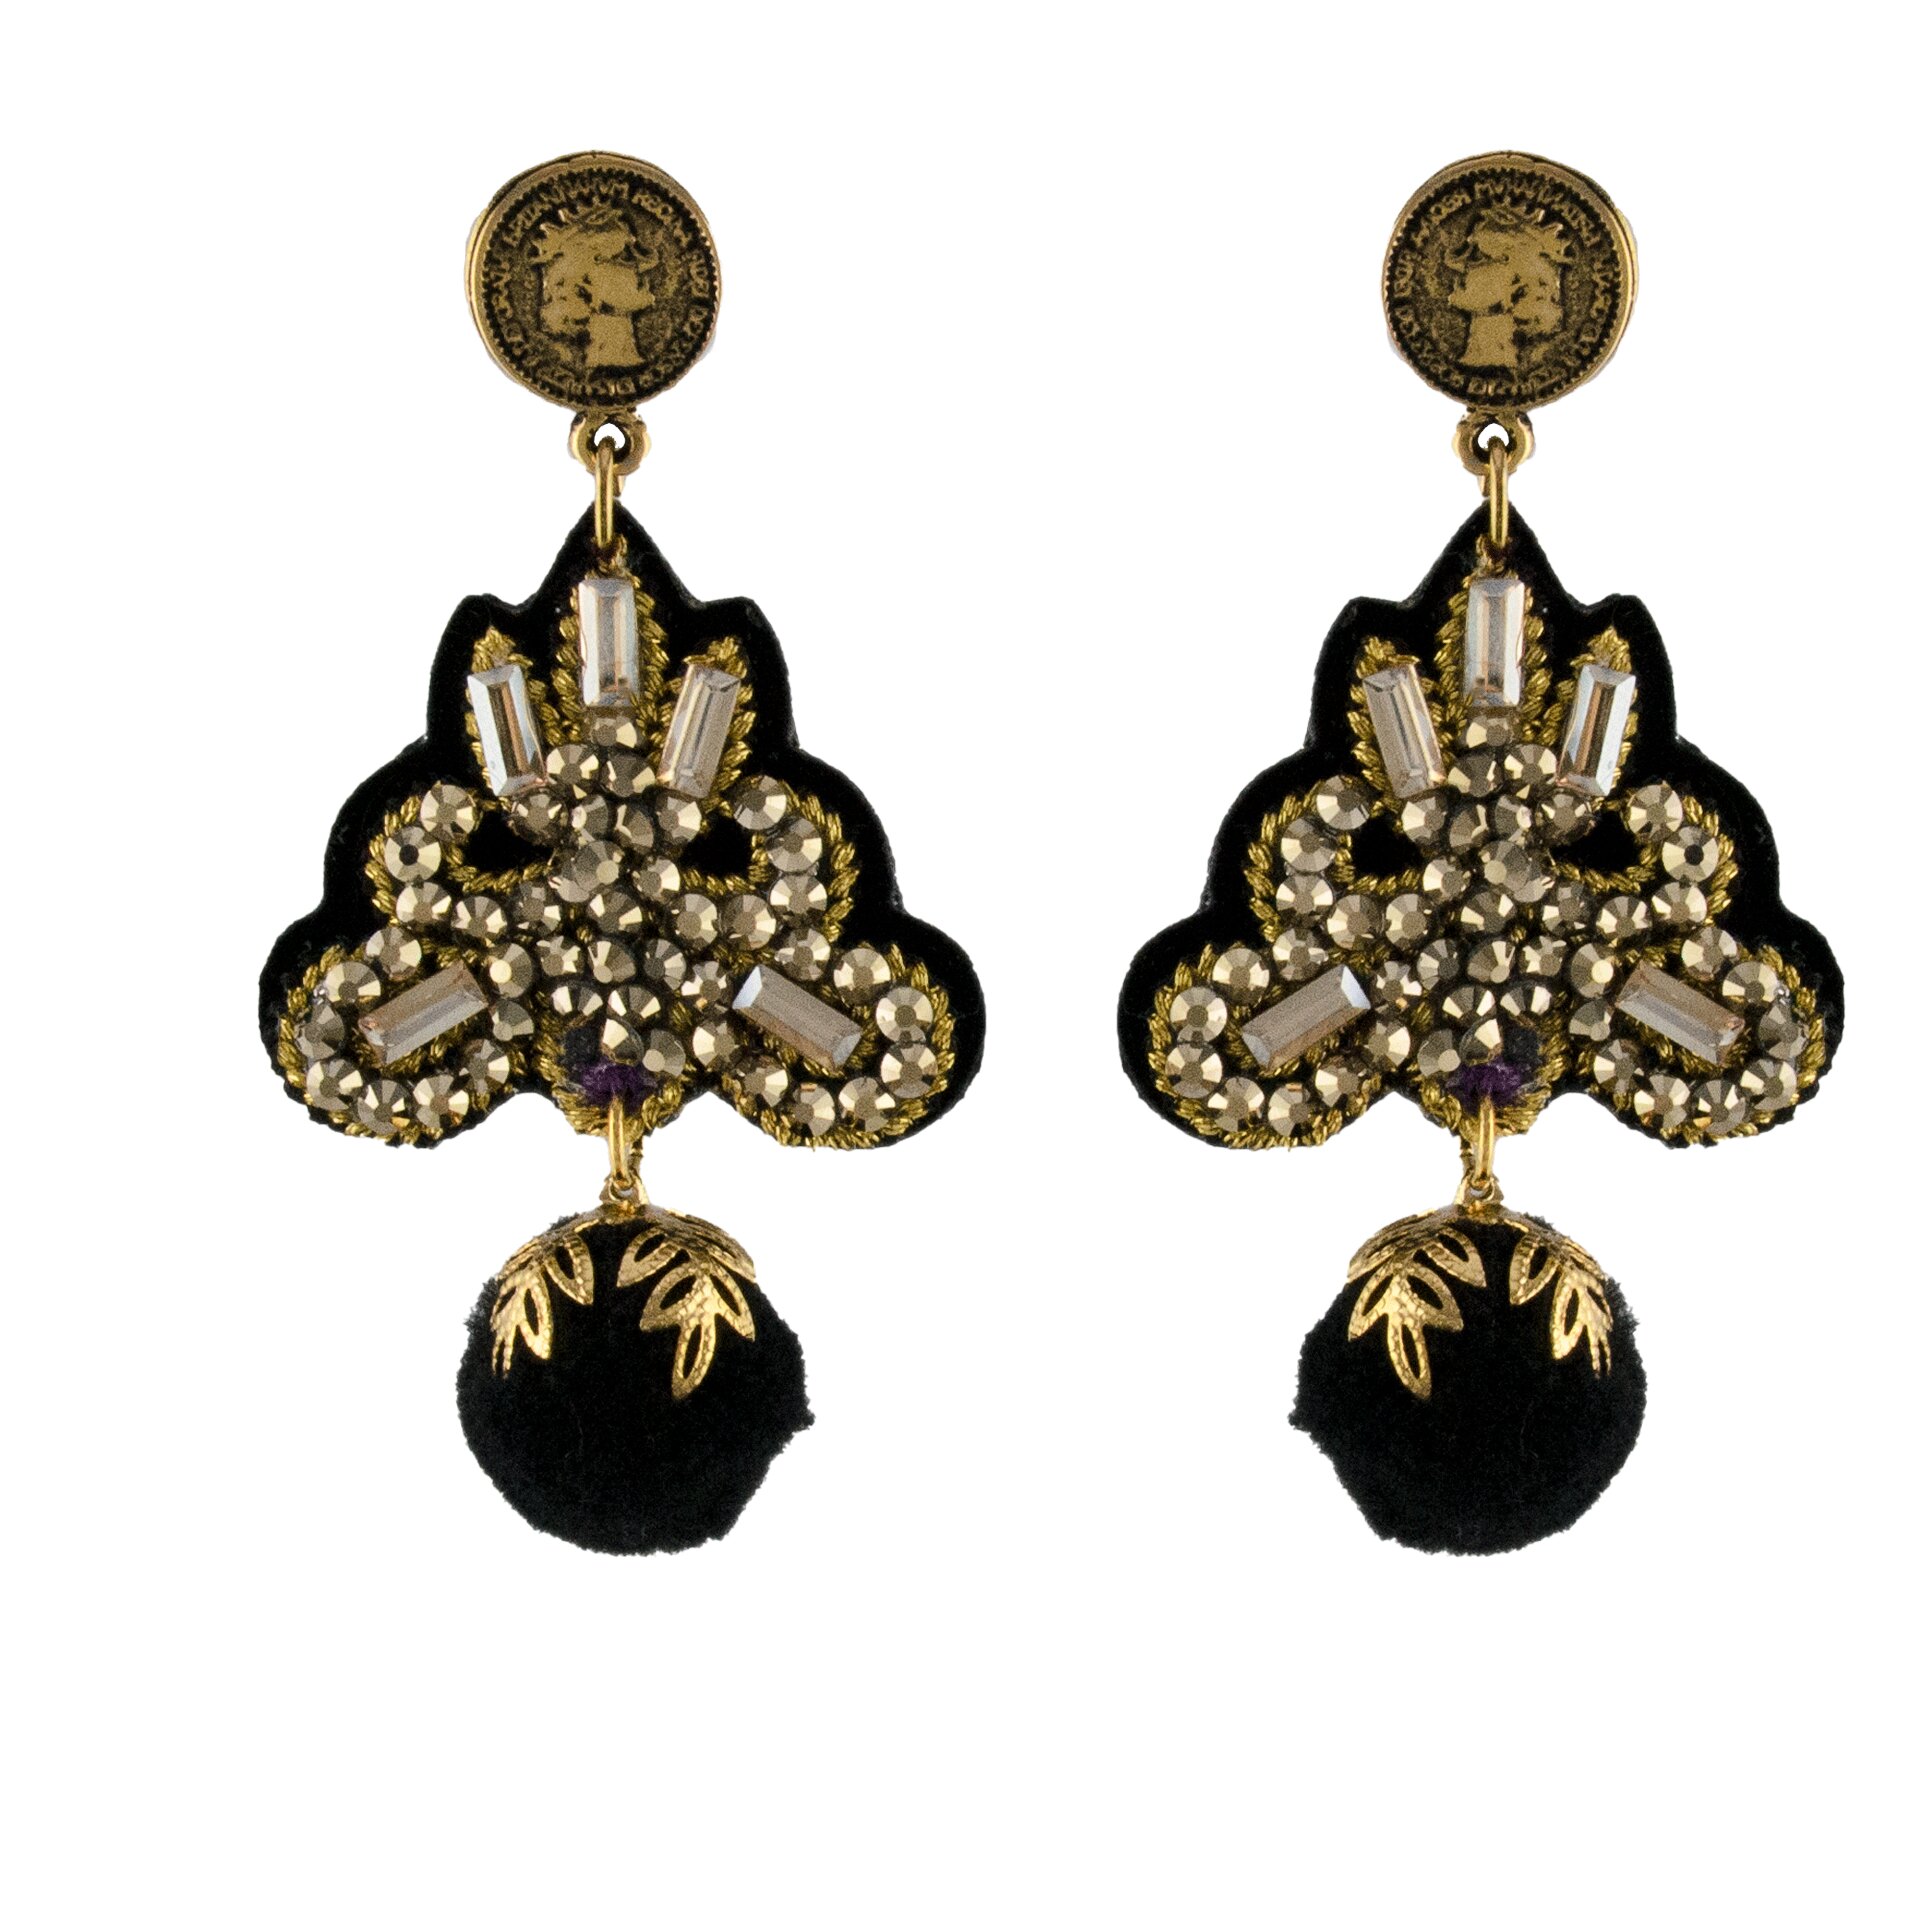 LINDA'S DREAM gold earrings with a black pom-pom and gold elements